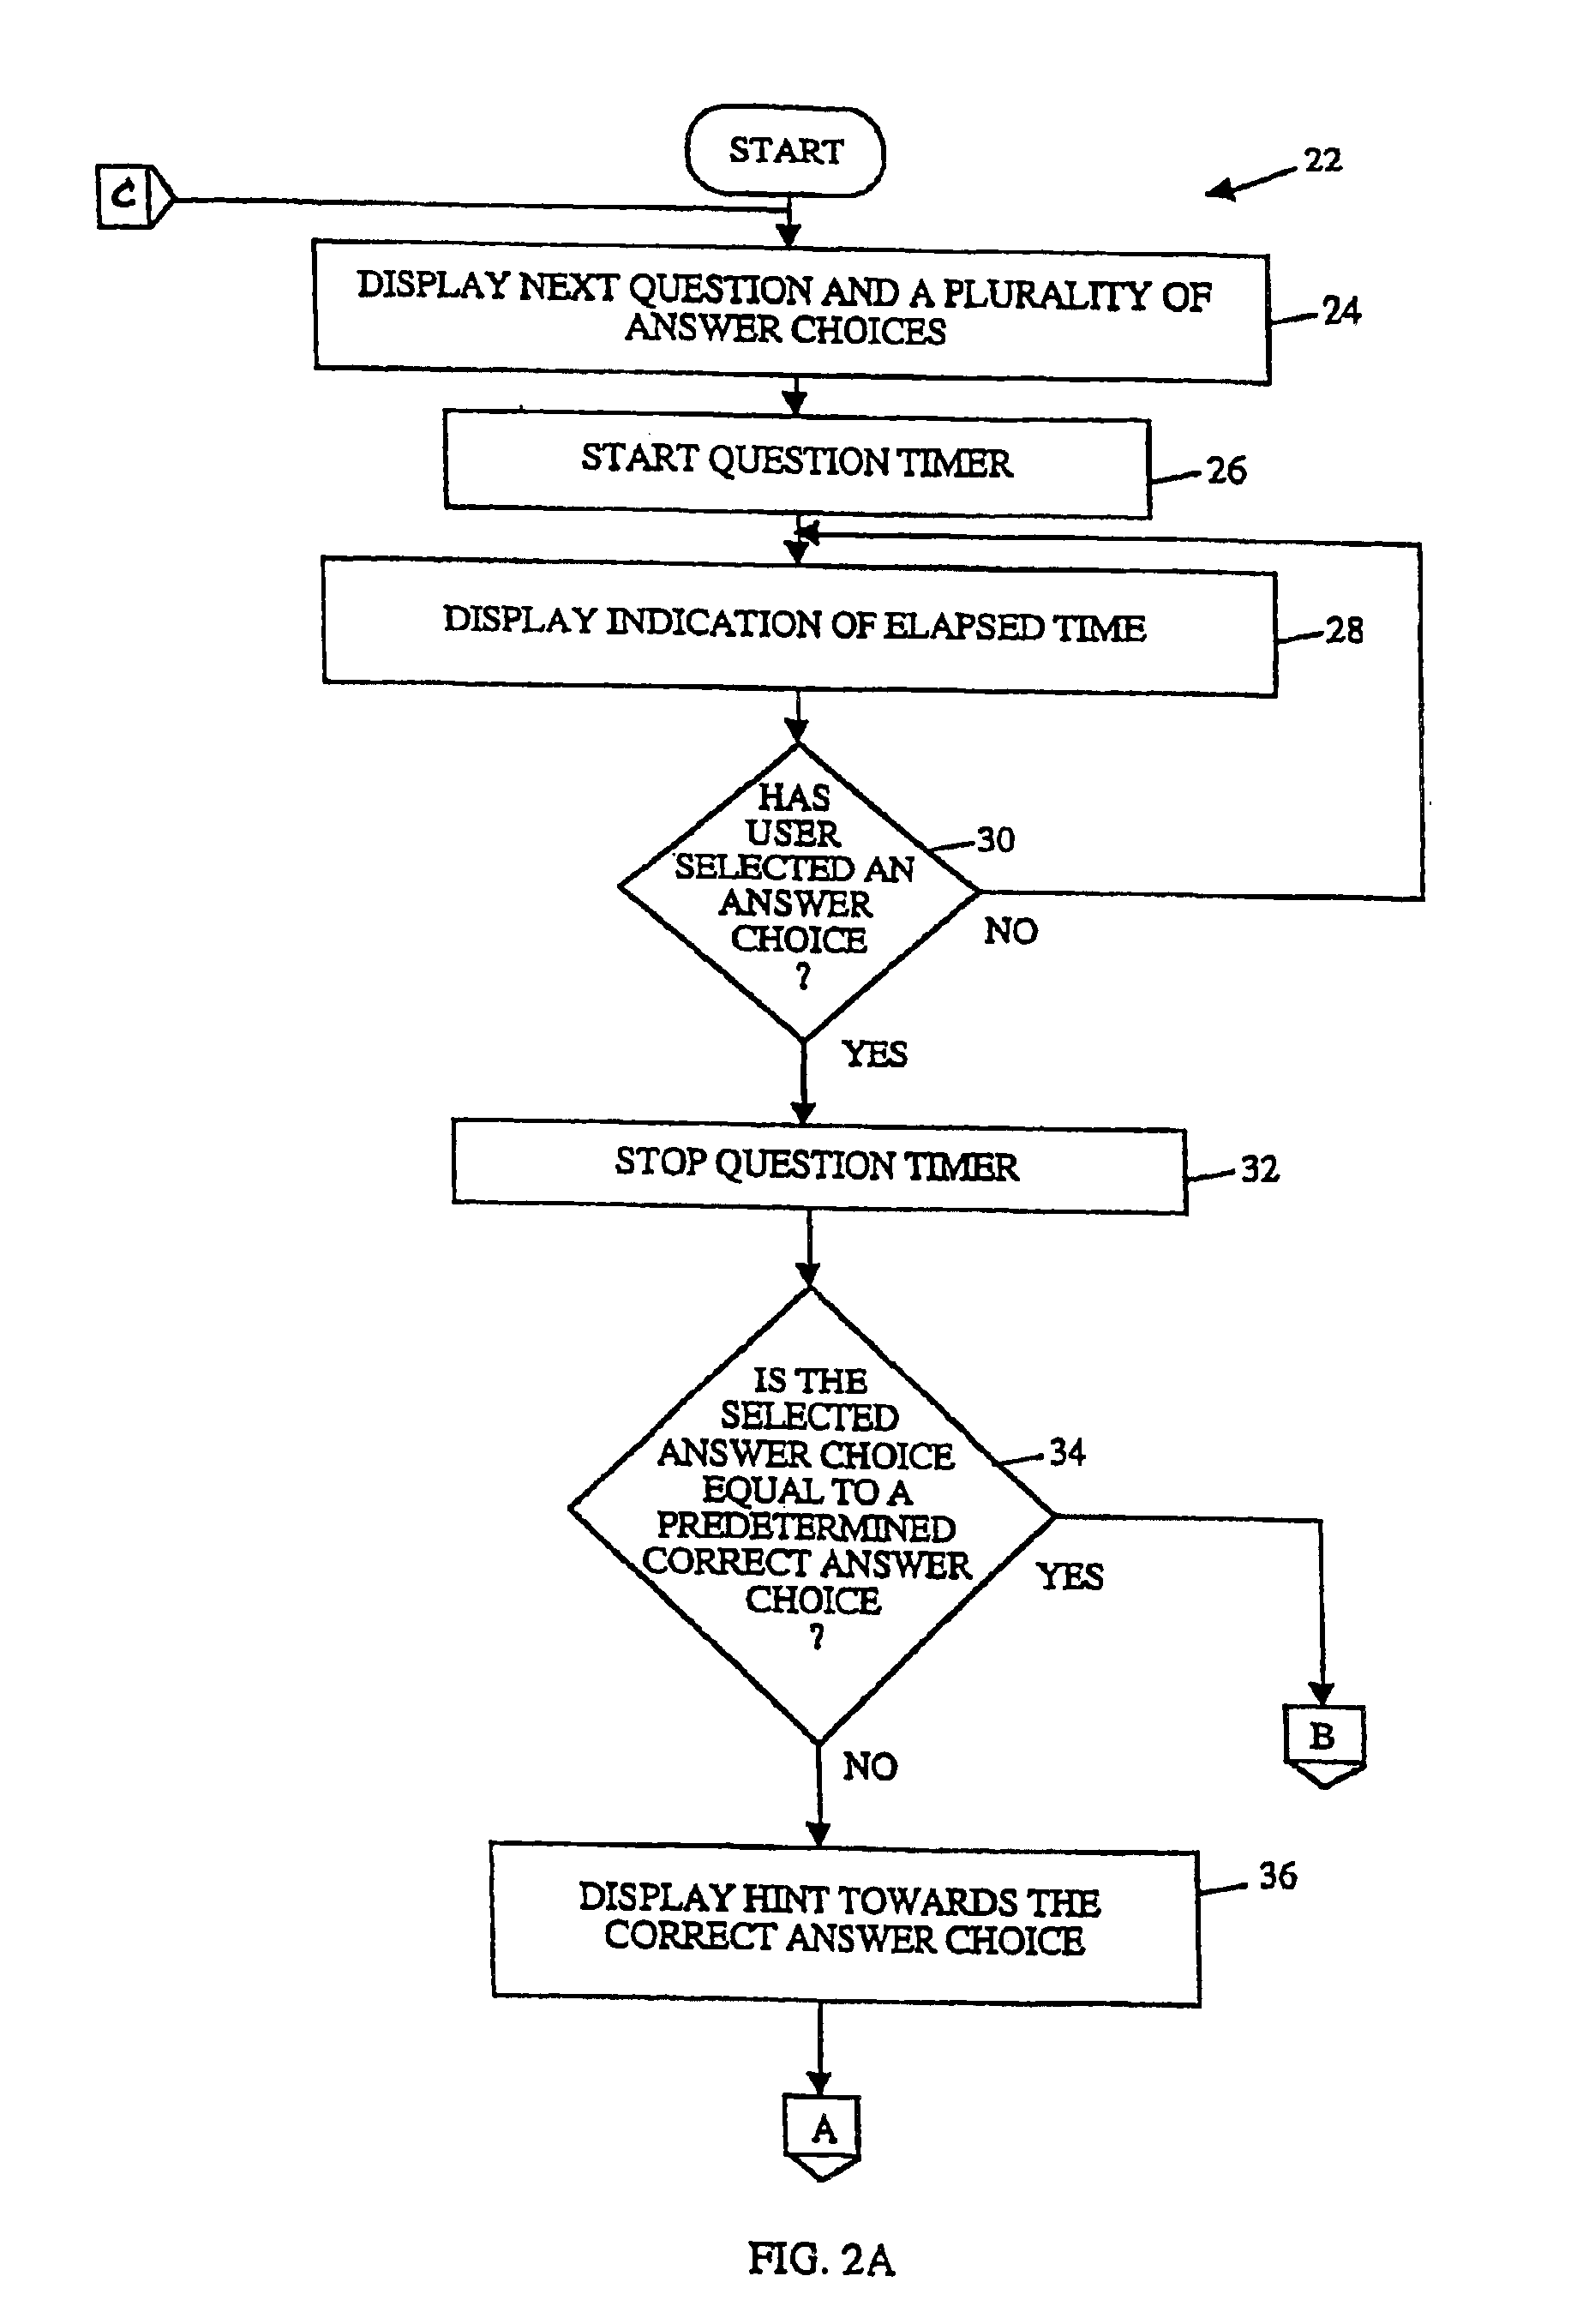 Method and apparatus for improving performance on multiple-choice exams